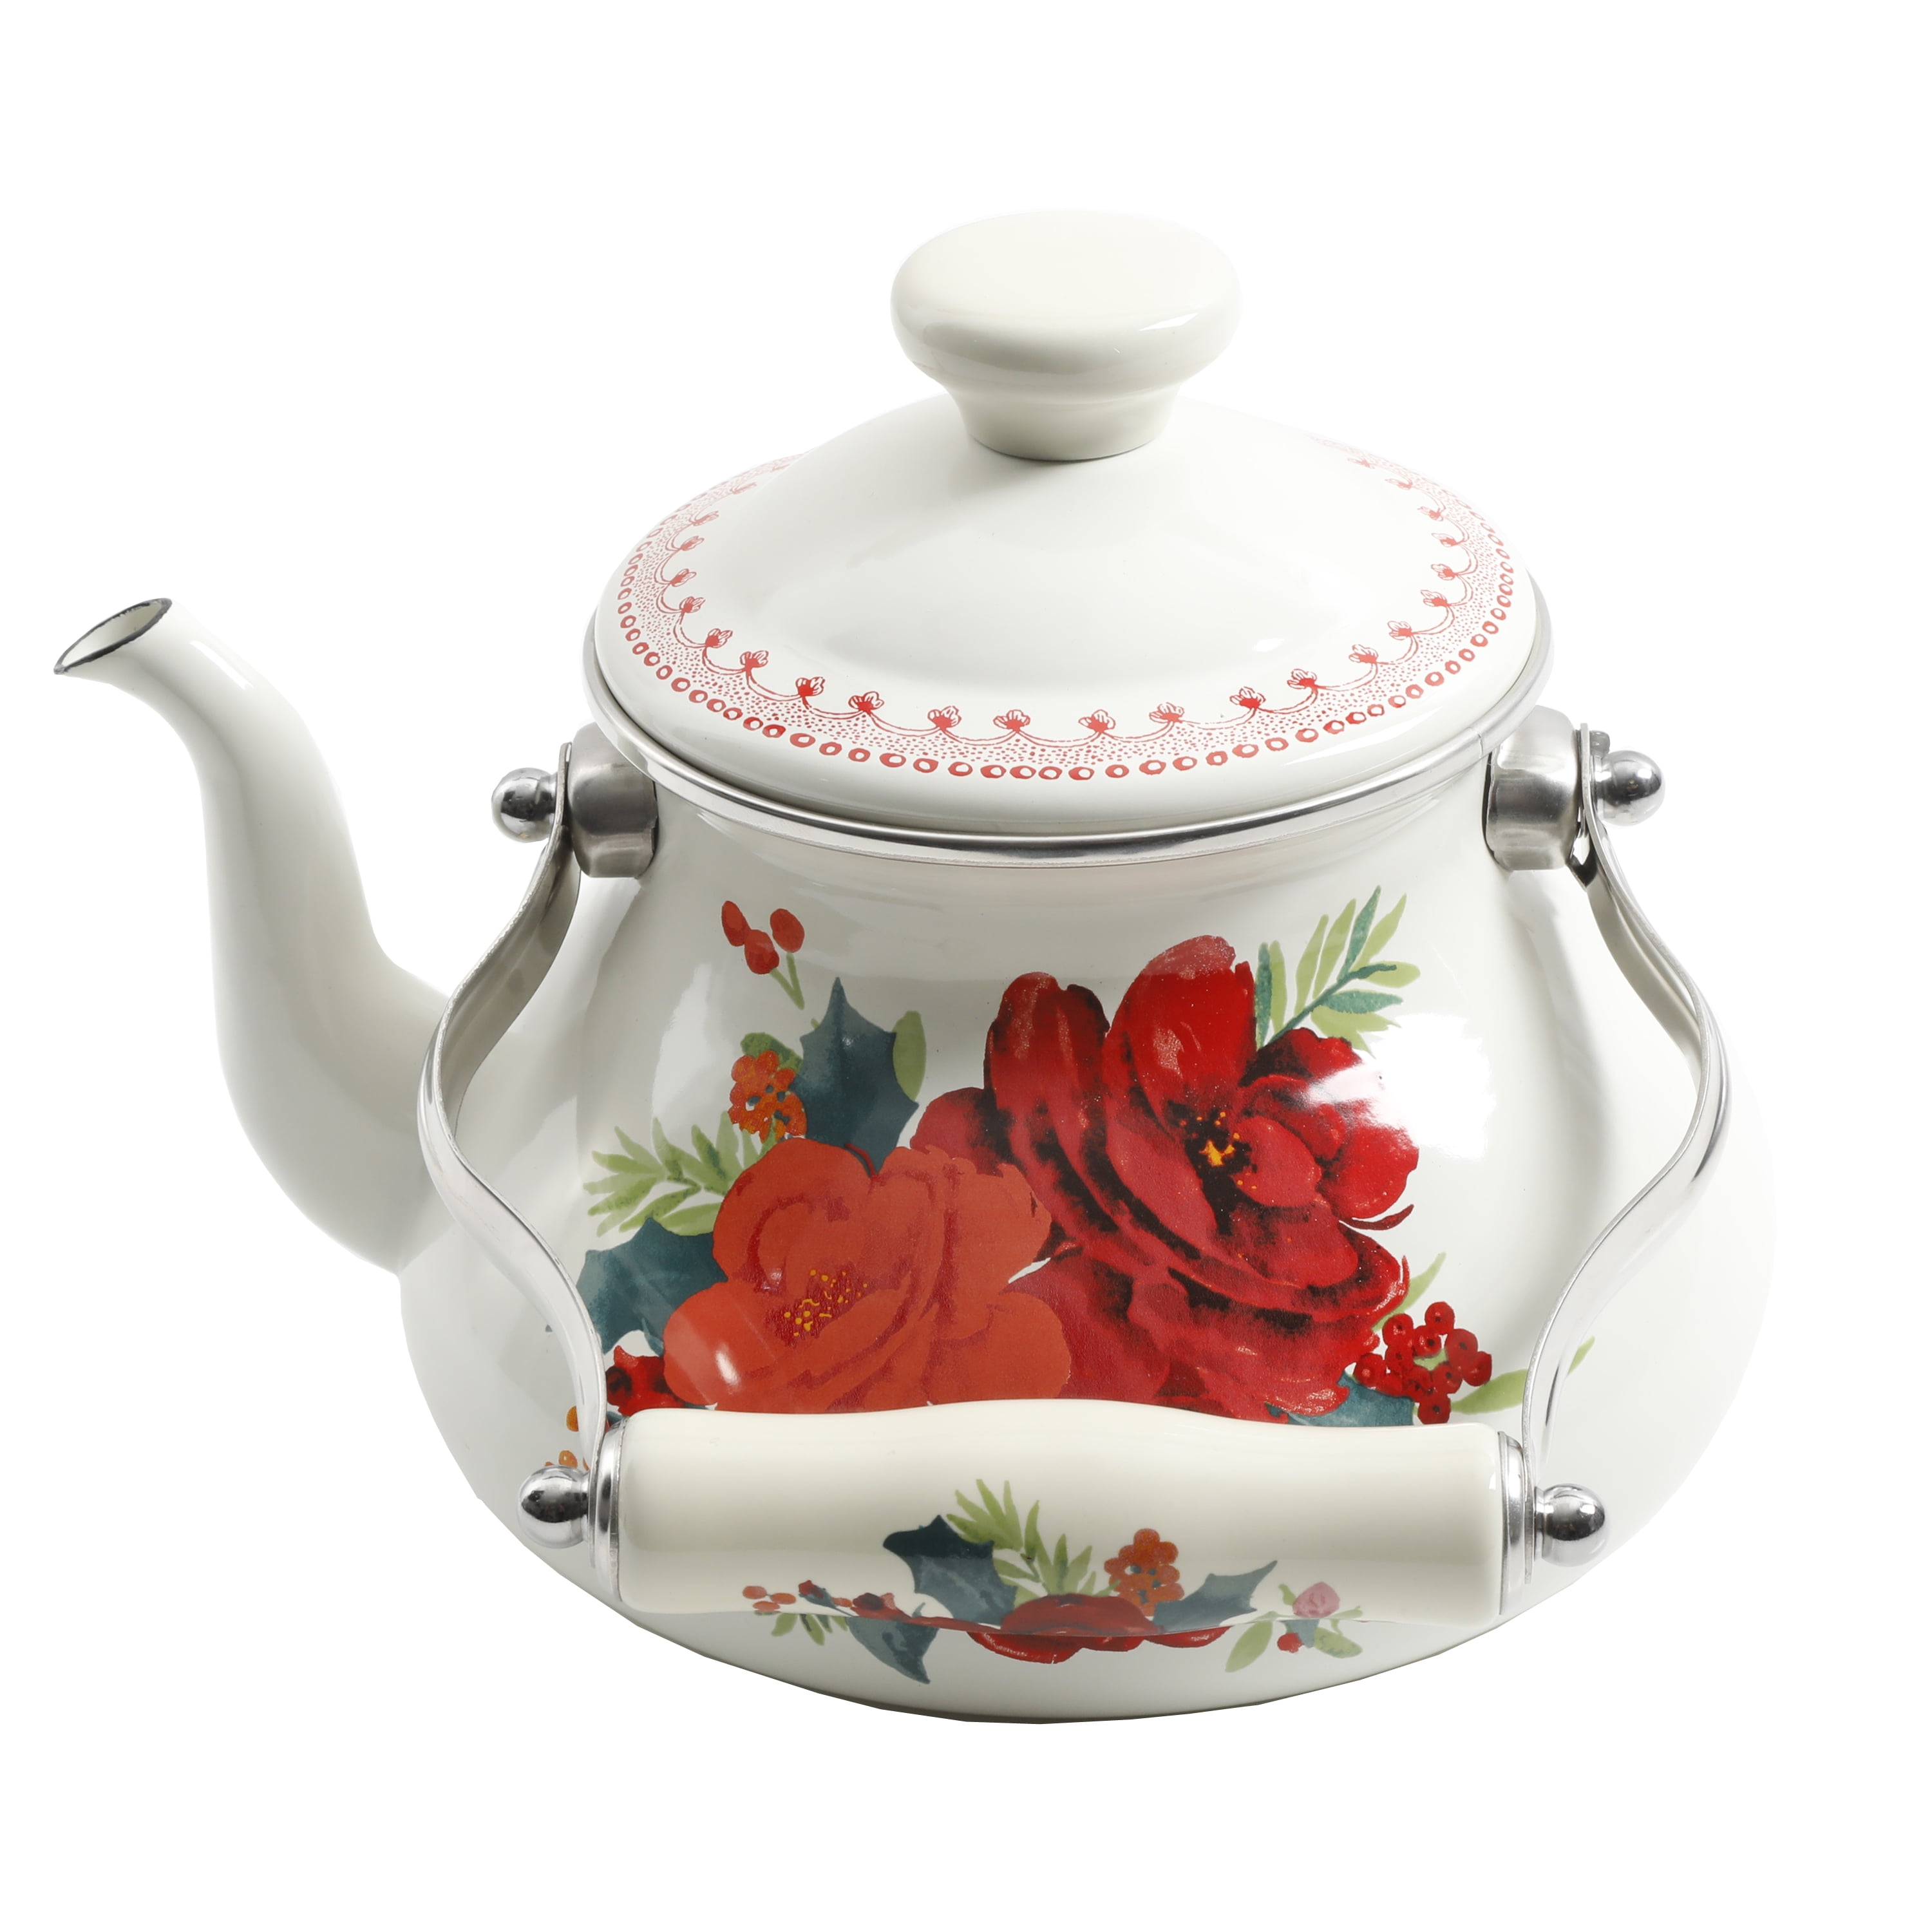 Pioneer Woman Tea Kettle & Instant Pot - household items - by